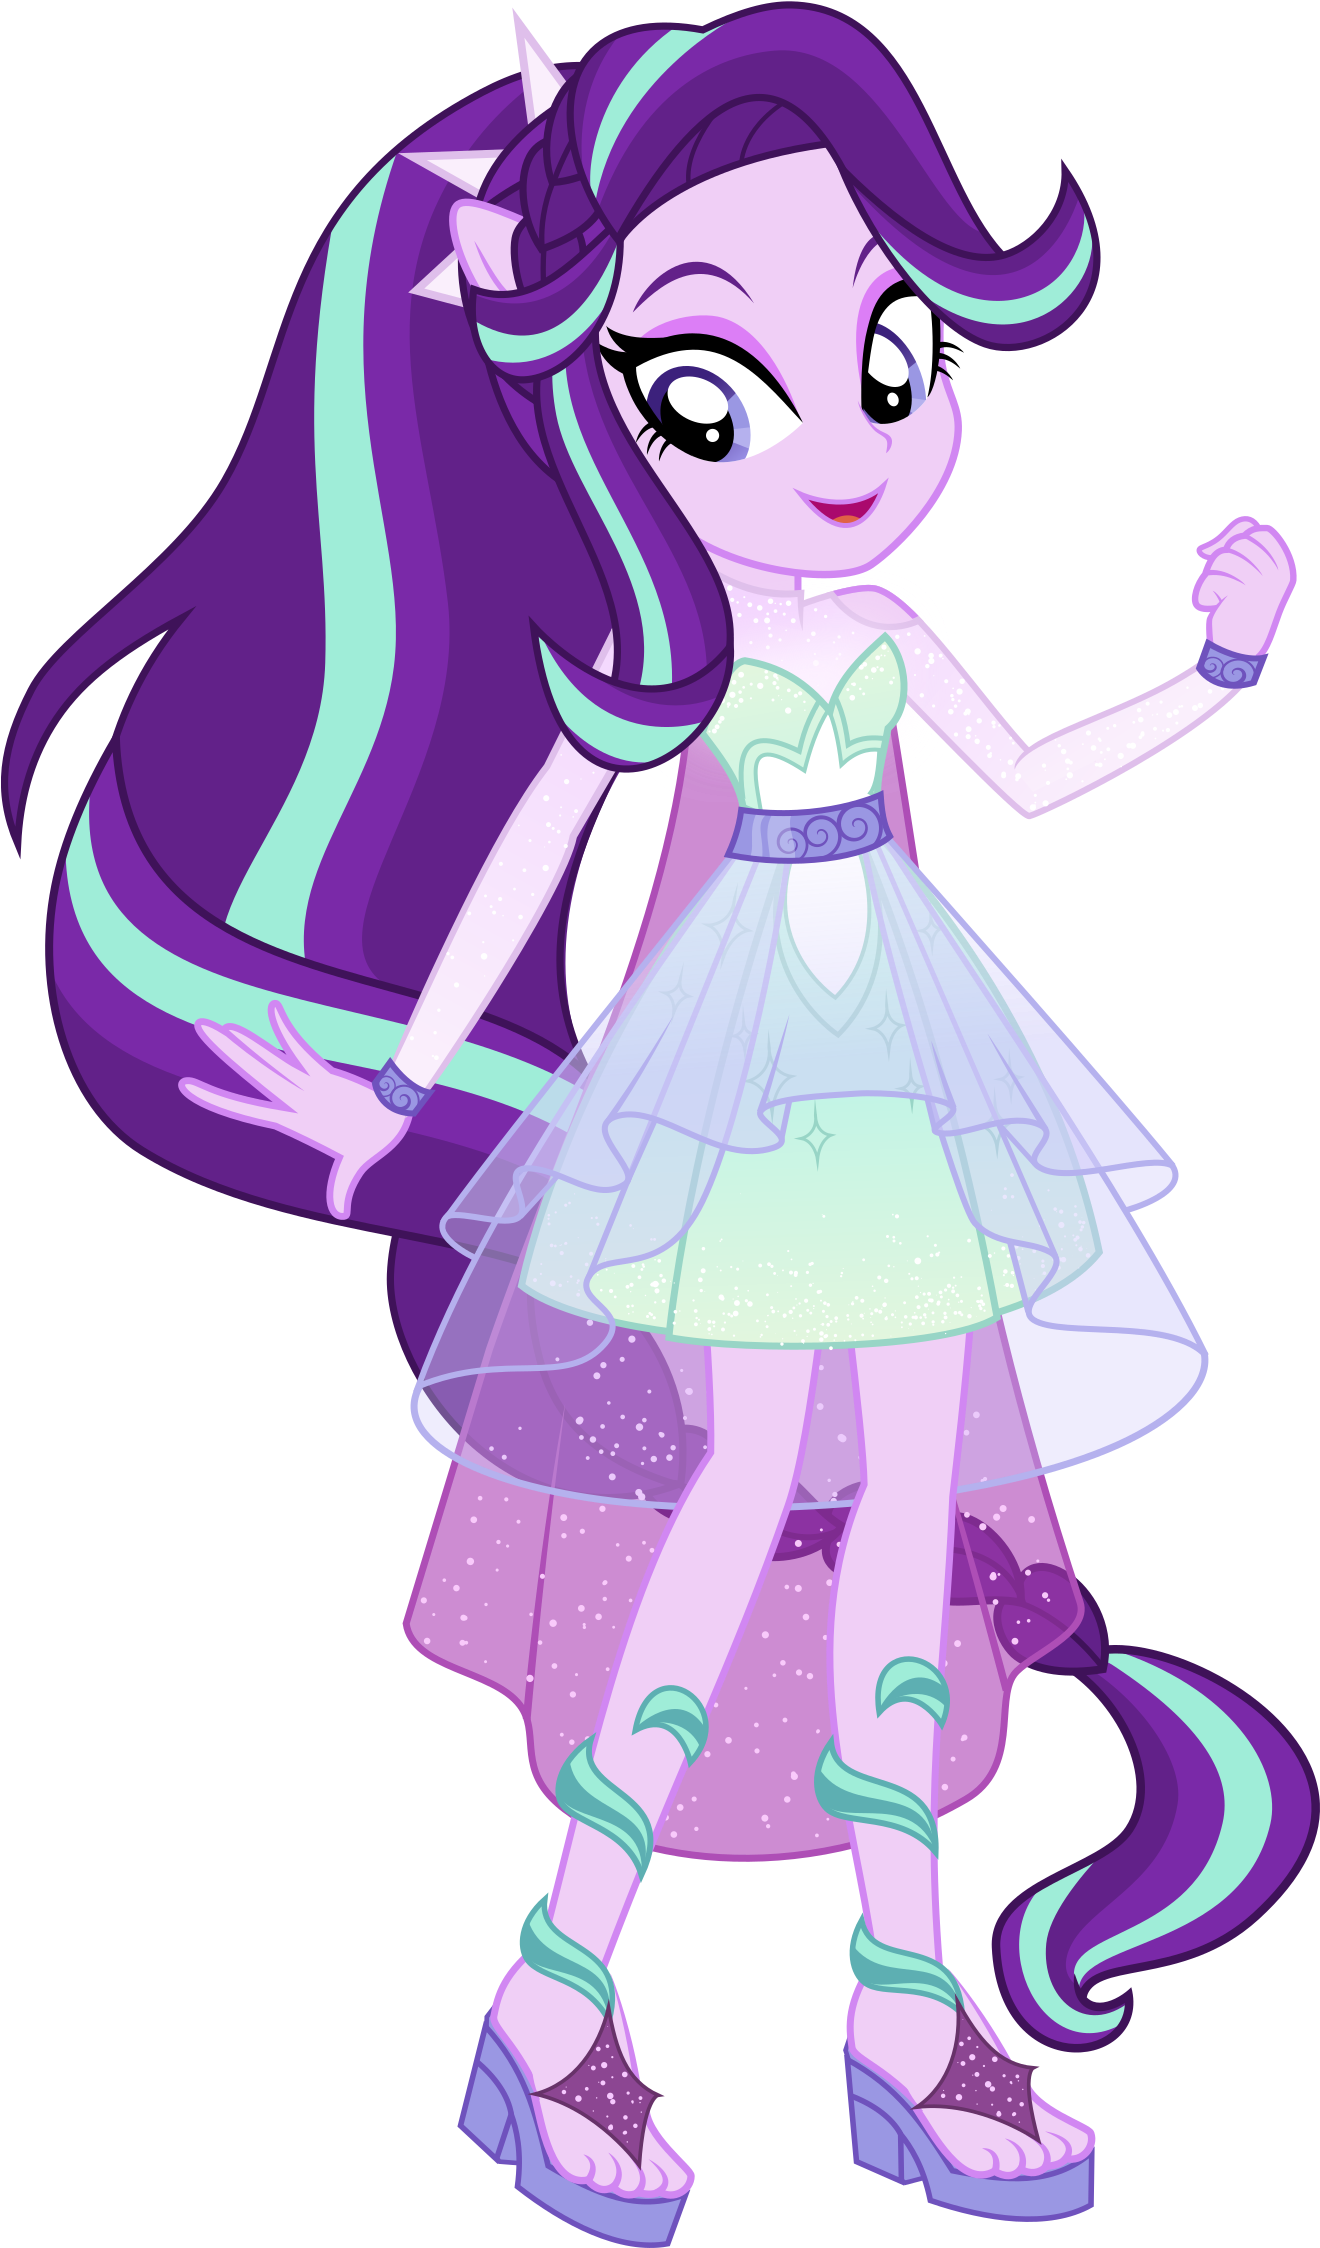 Of Course Always Cutest Character - Equestria Girls Starlight Glimmer (1319x2267)